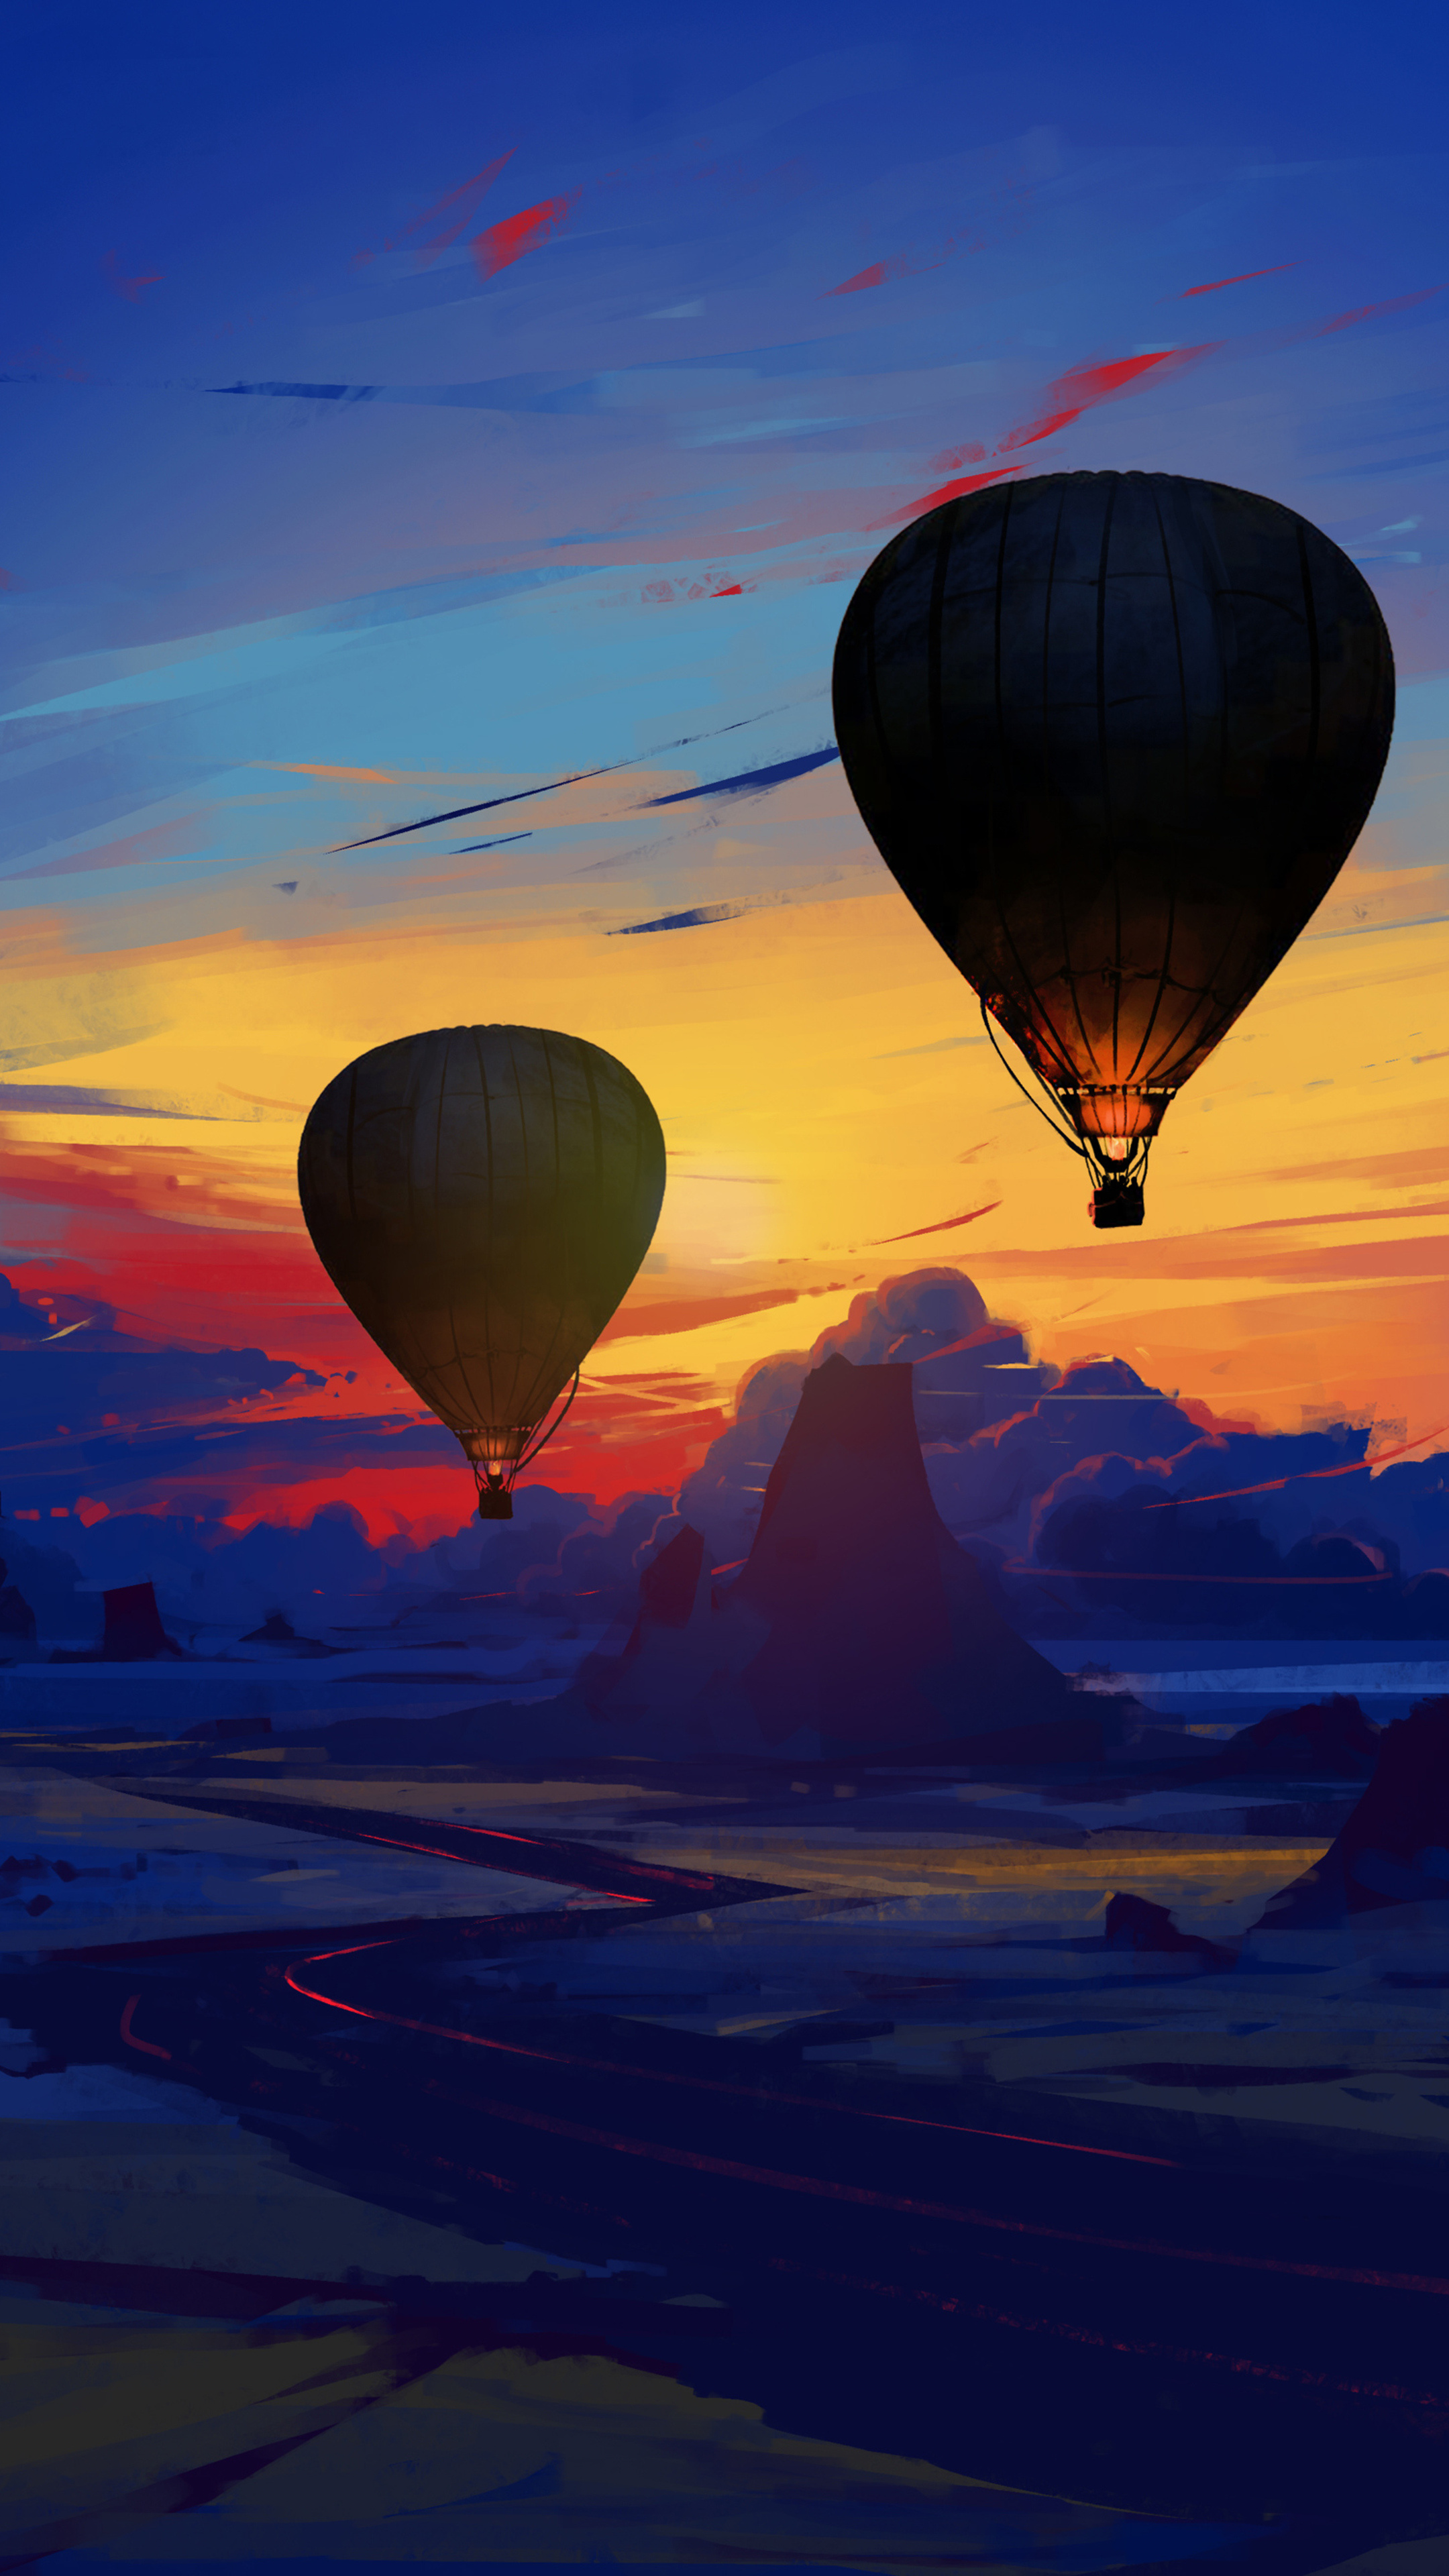 Air Sports: Art, Drawing, Hot-air balloon floating in the sky, Flies to extremely high altitudes. 2160x3840 4K Wallpaper.